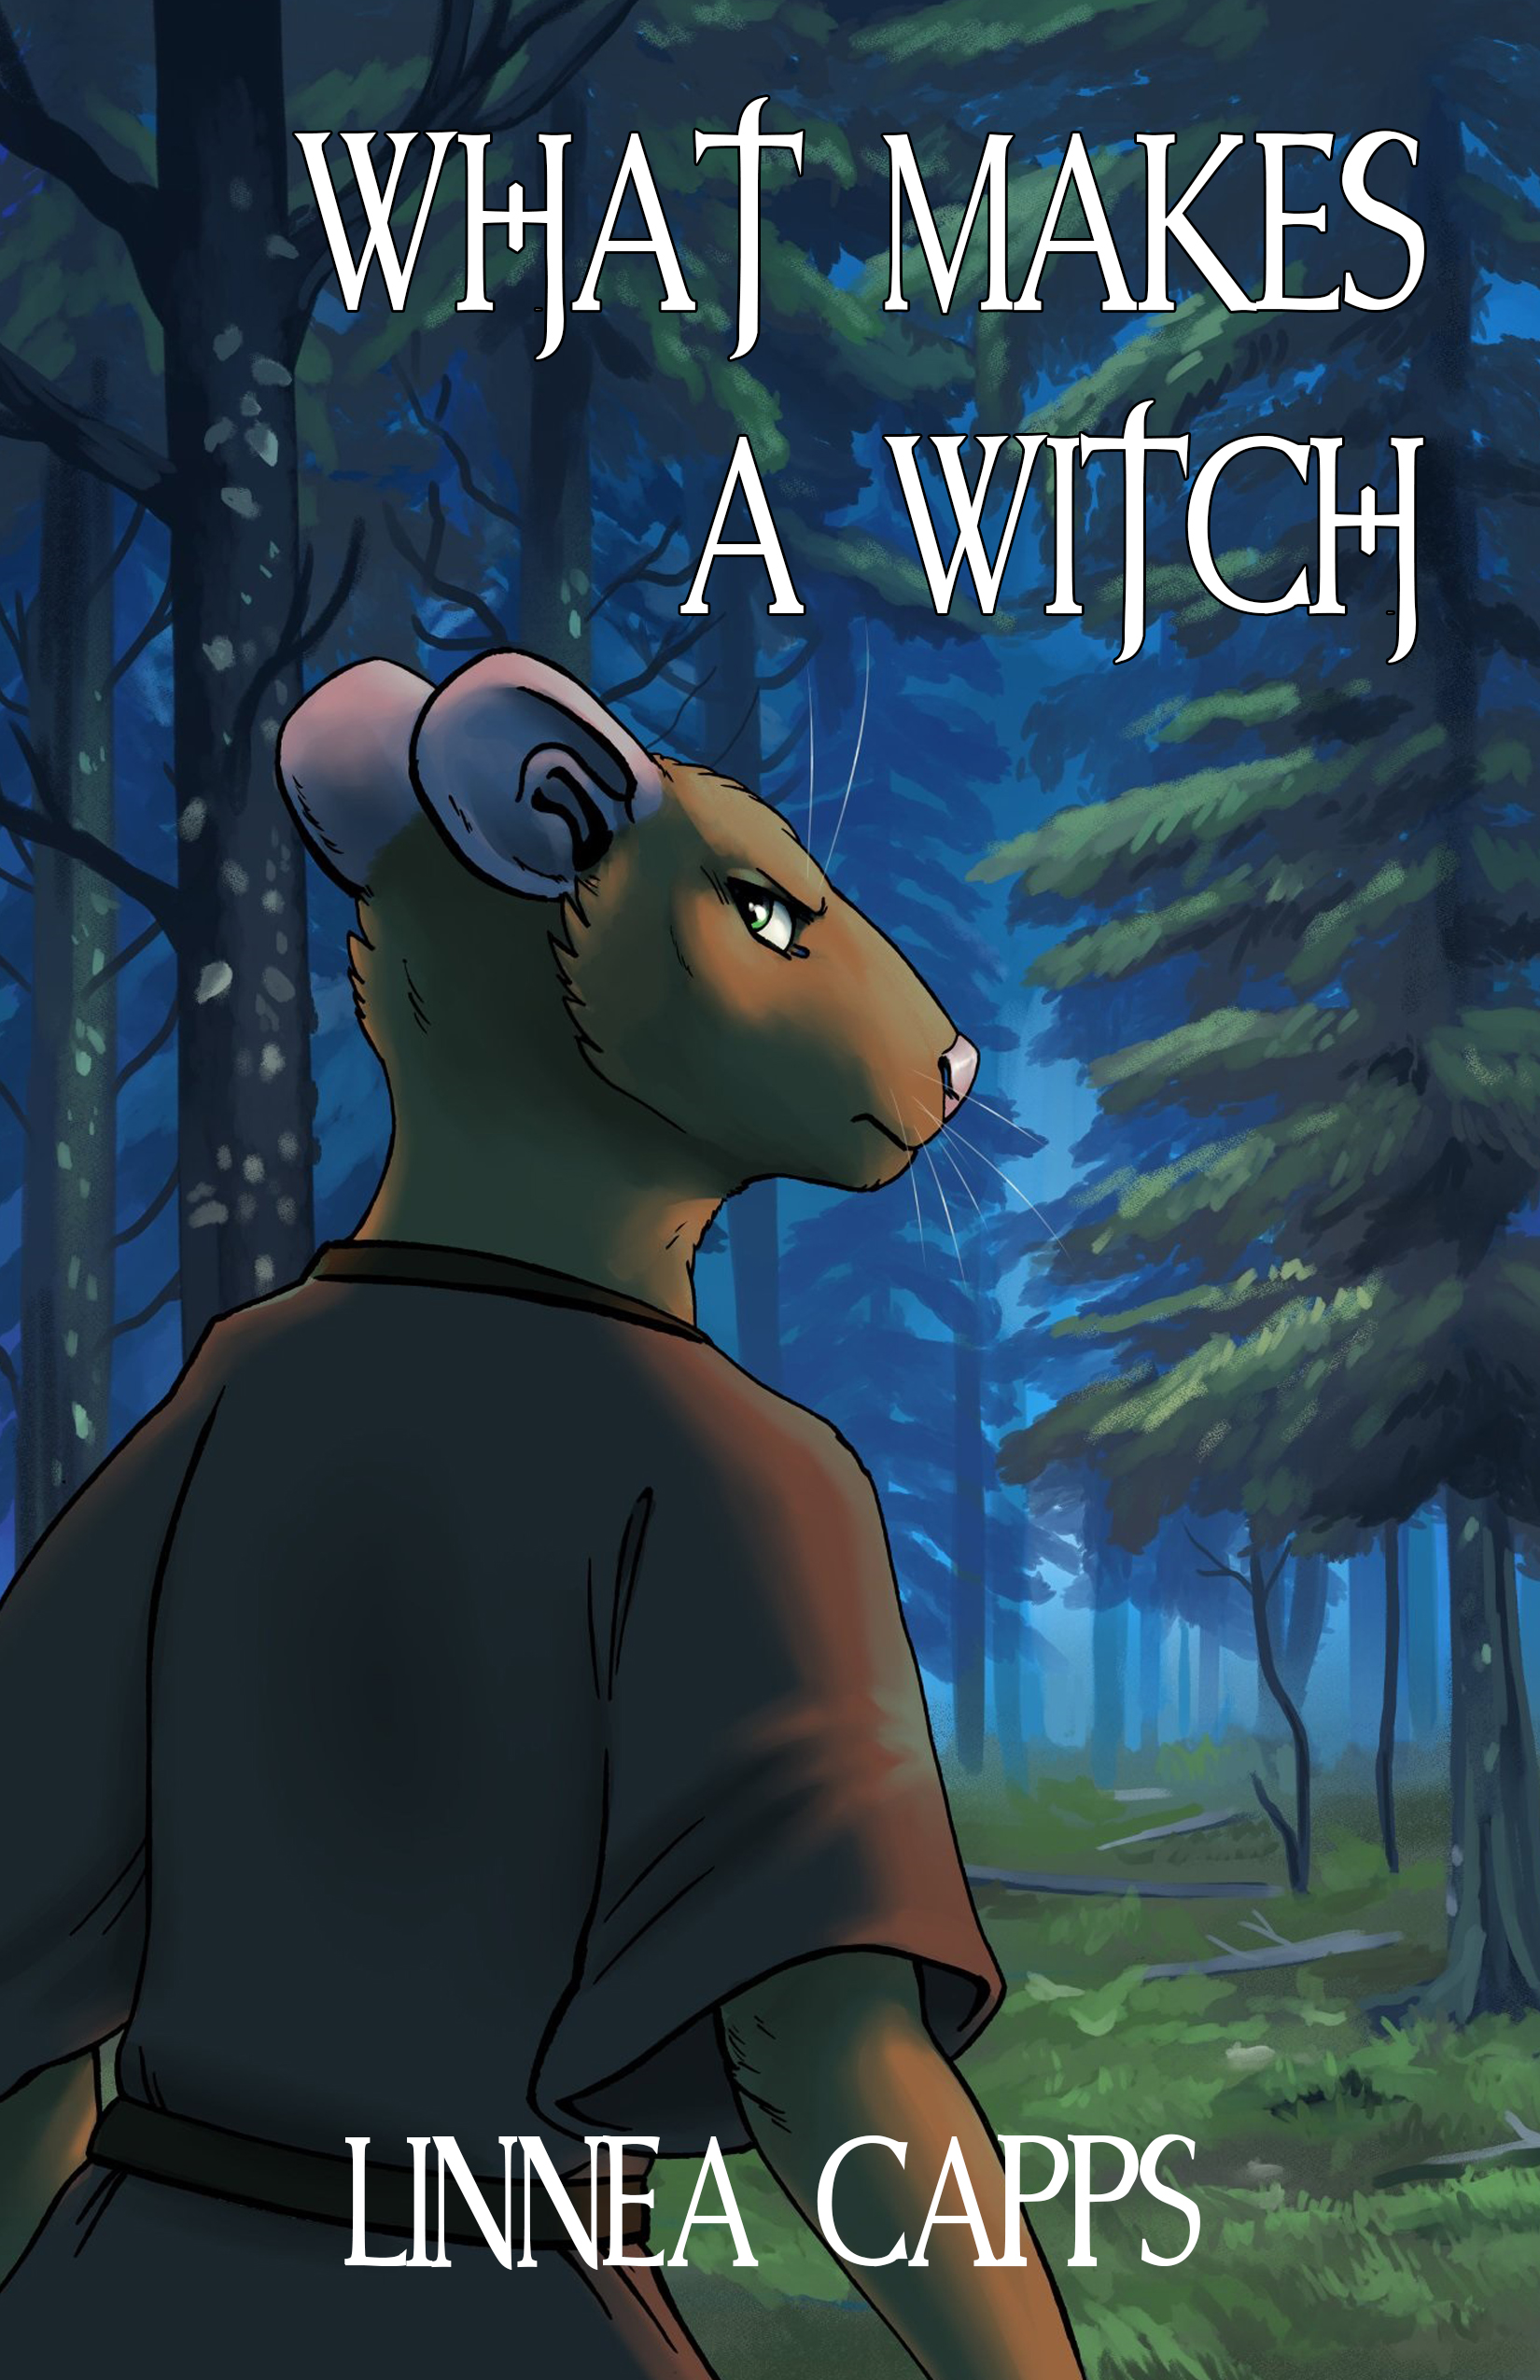 What makes a witch by Linnea Capps